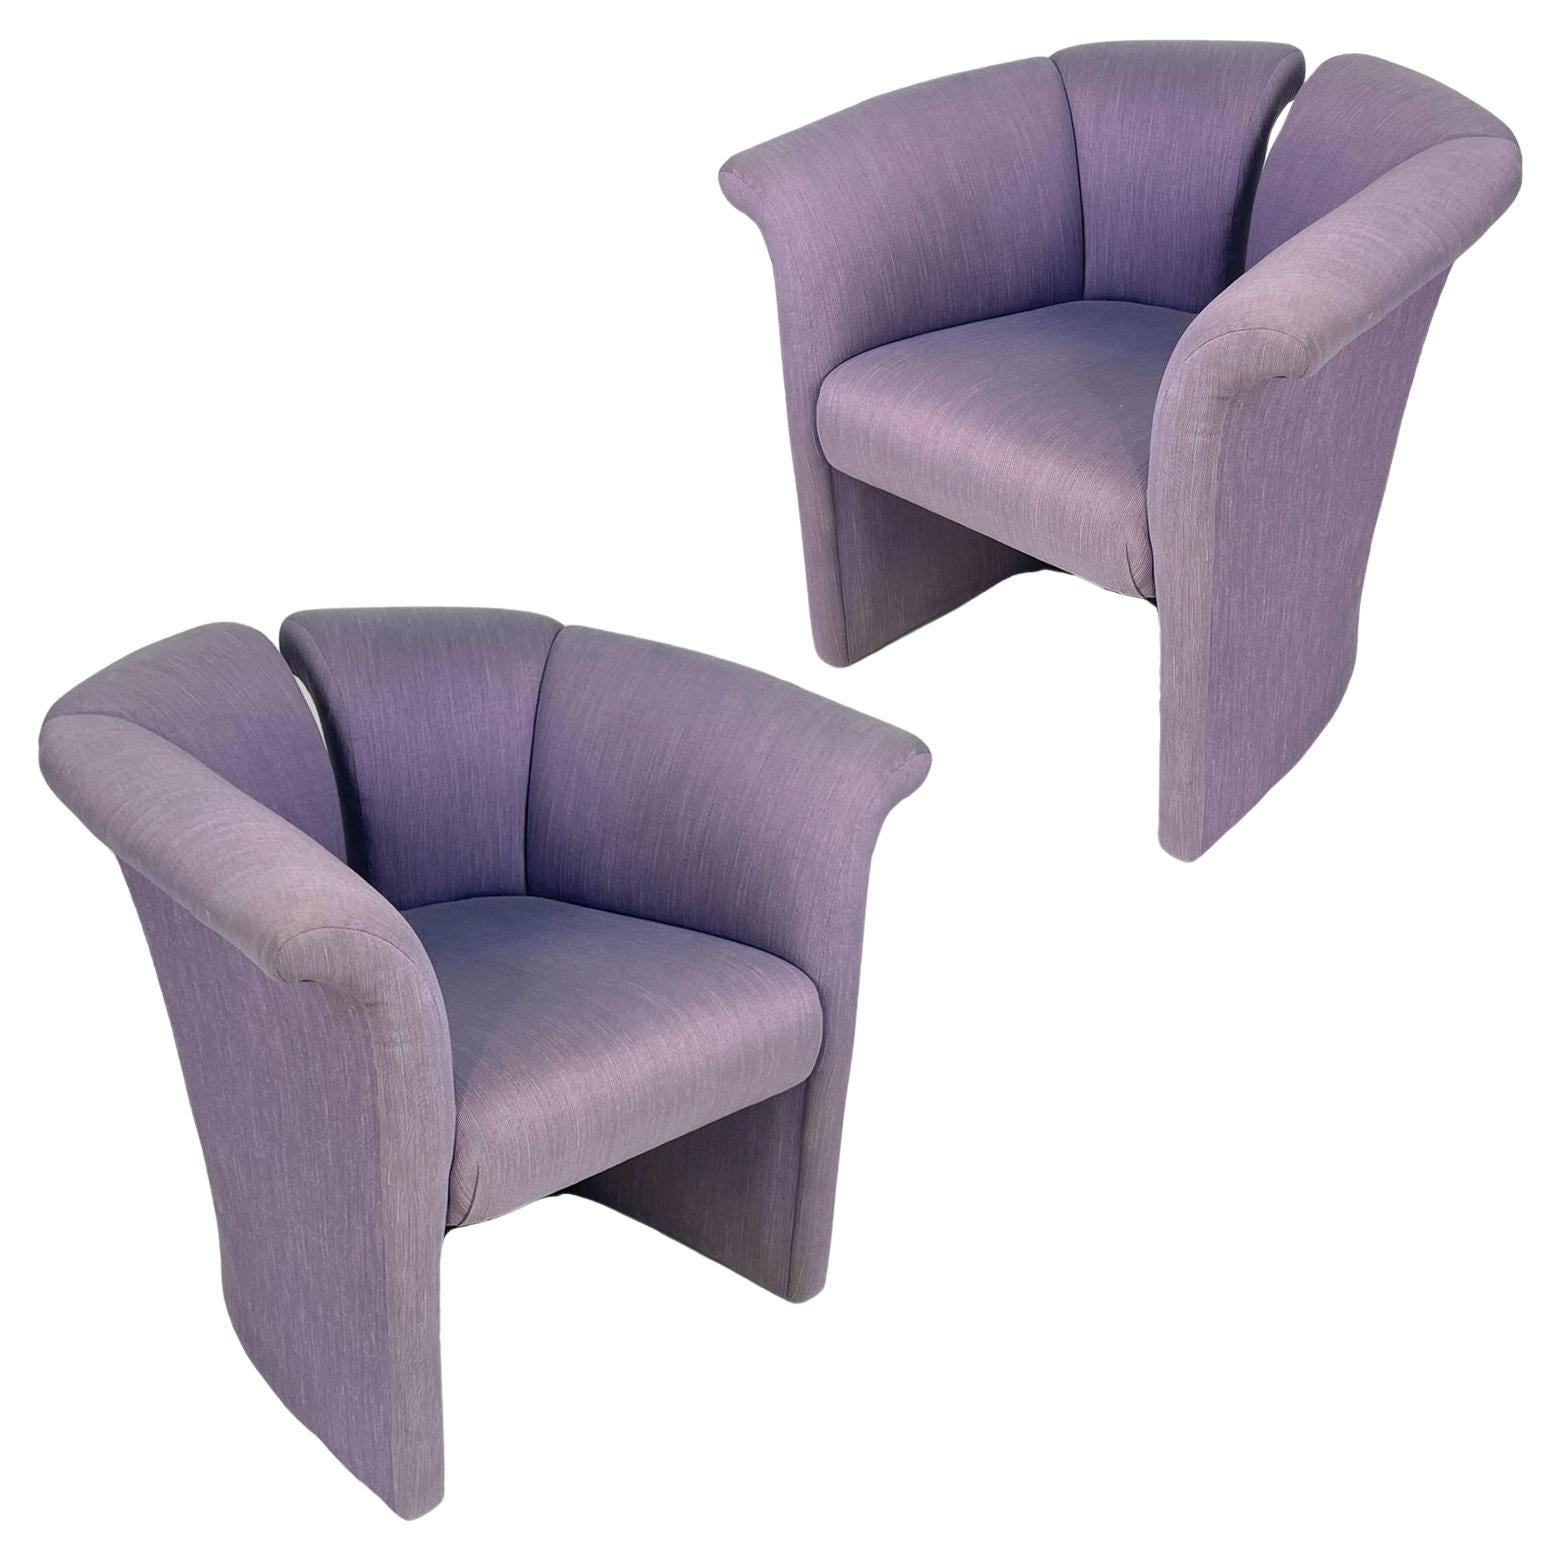 This unique pair of highly styled postmodern accent chairs are covered in a richly toned durable upholstery. The chairs feature great lines with a striking fanned back and curved arms for superior comfort. Fun, comfortable chairs for midcentury or